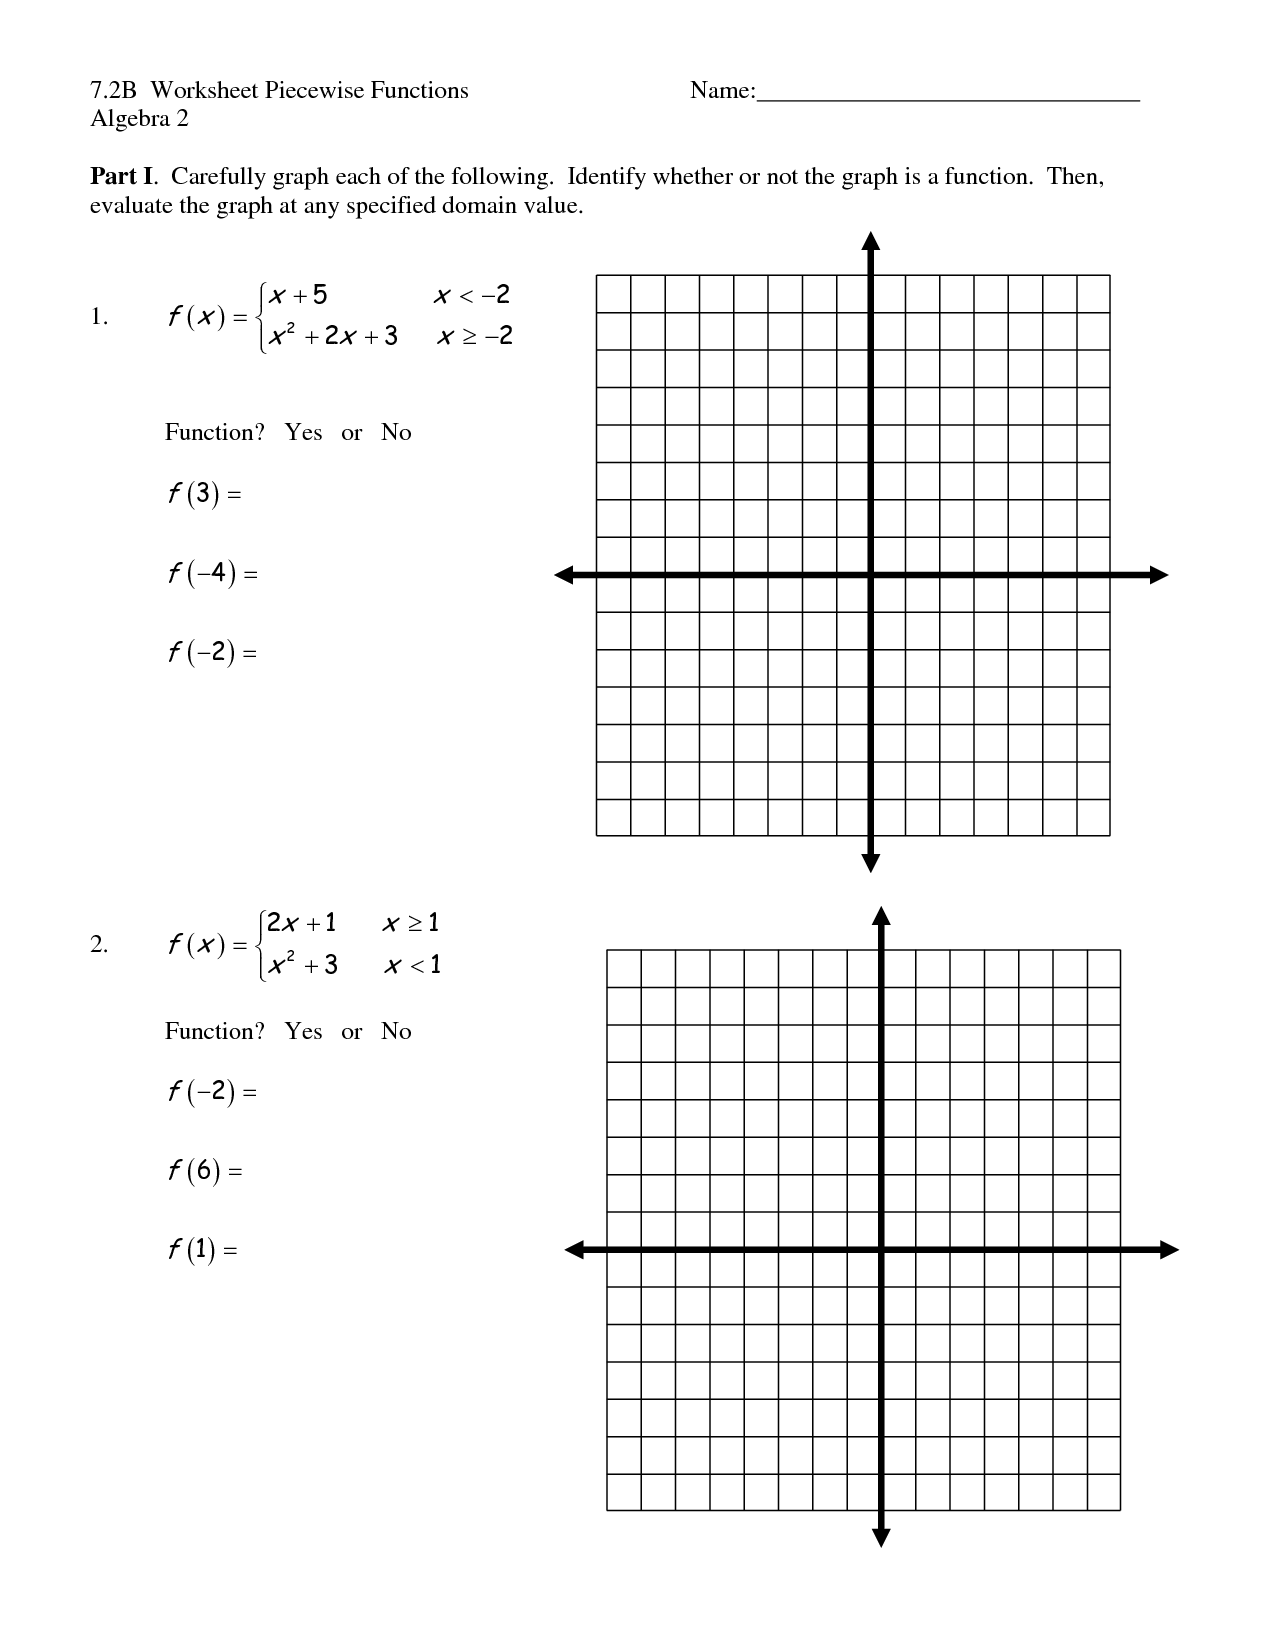 Piecewise Functions Practice Worksheet With Answers - Nidecmege For Worksheet Piecewise Functions Answer Key